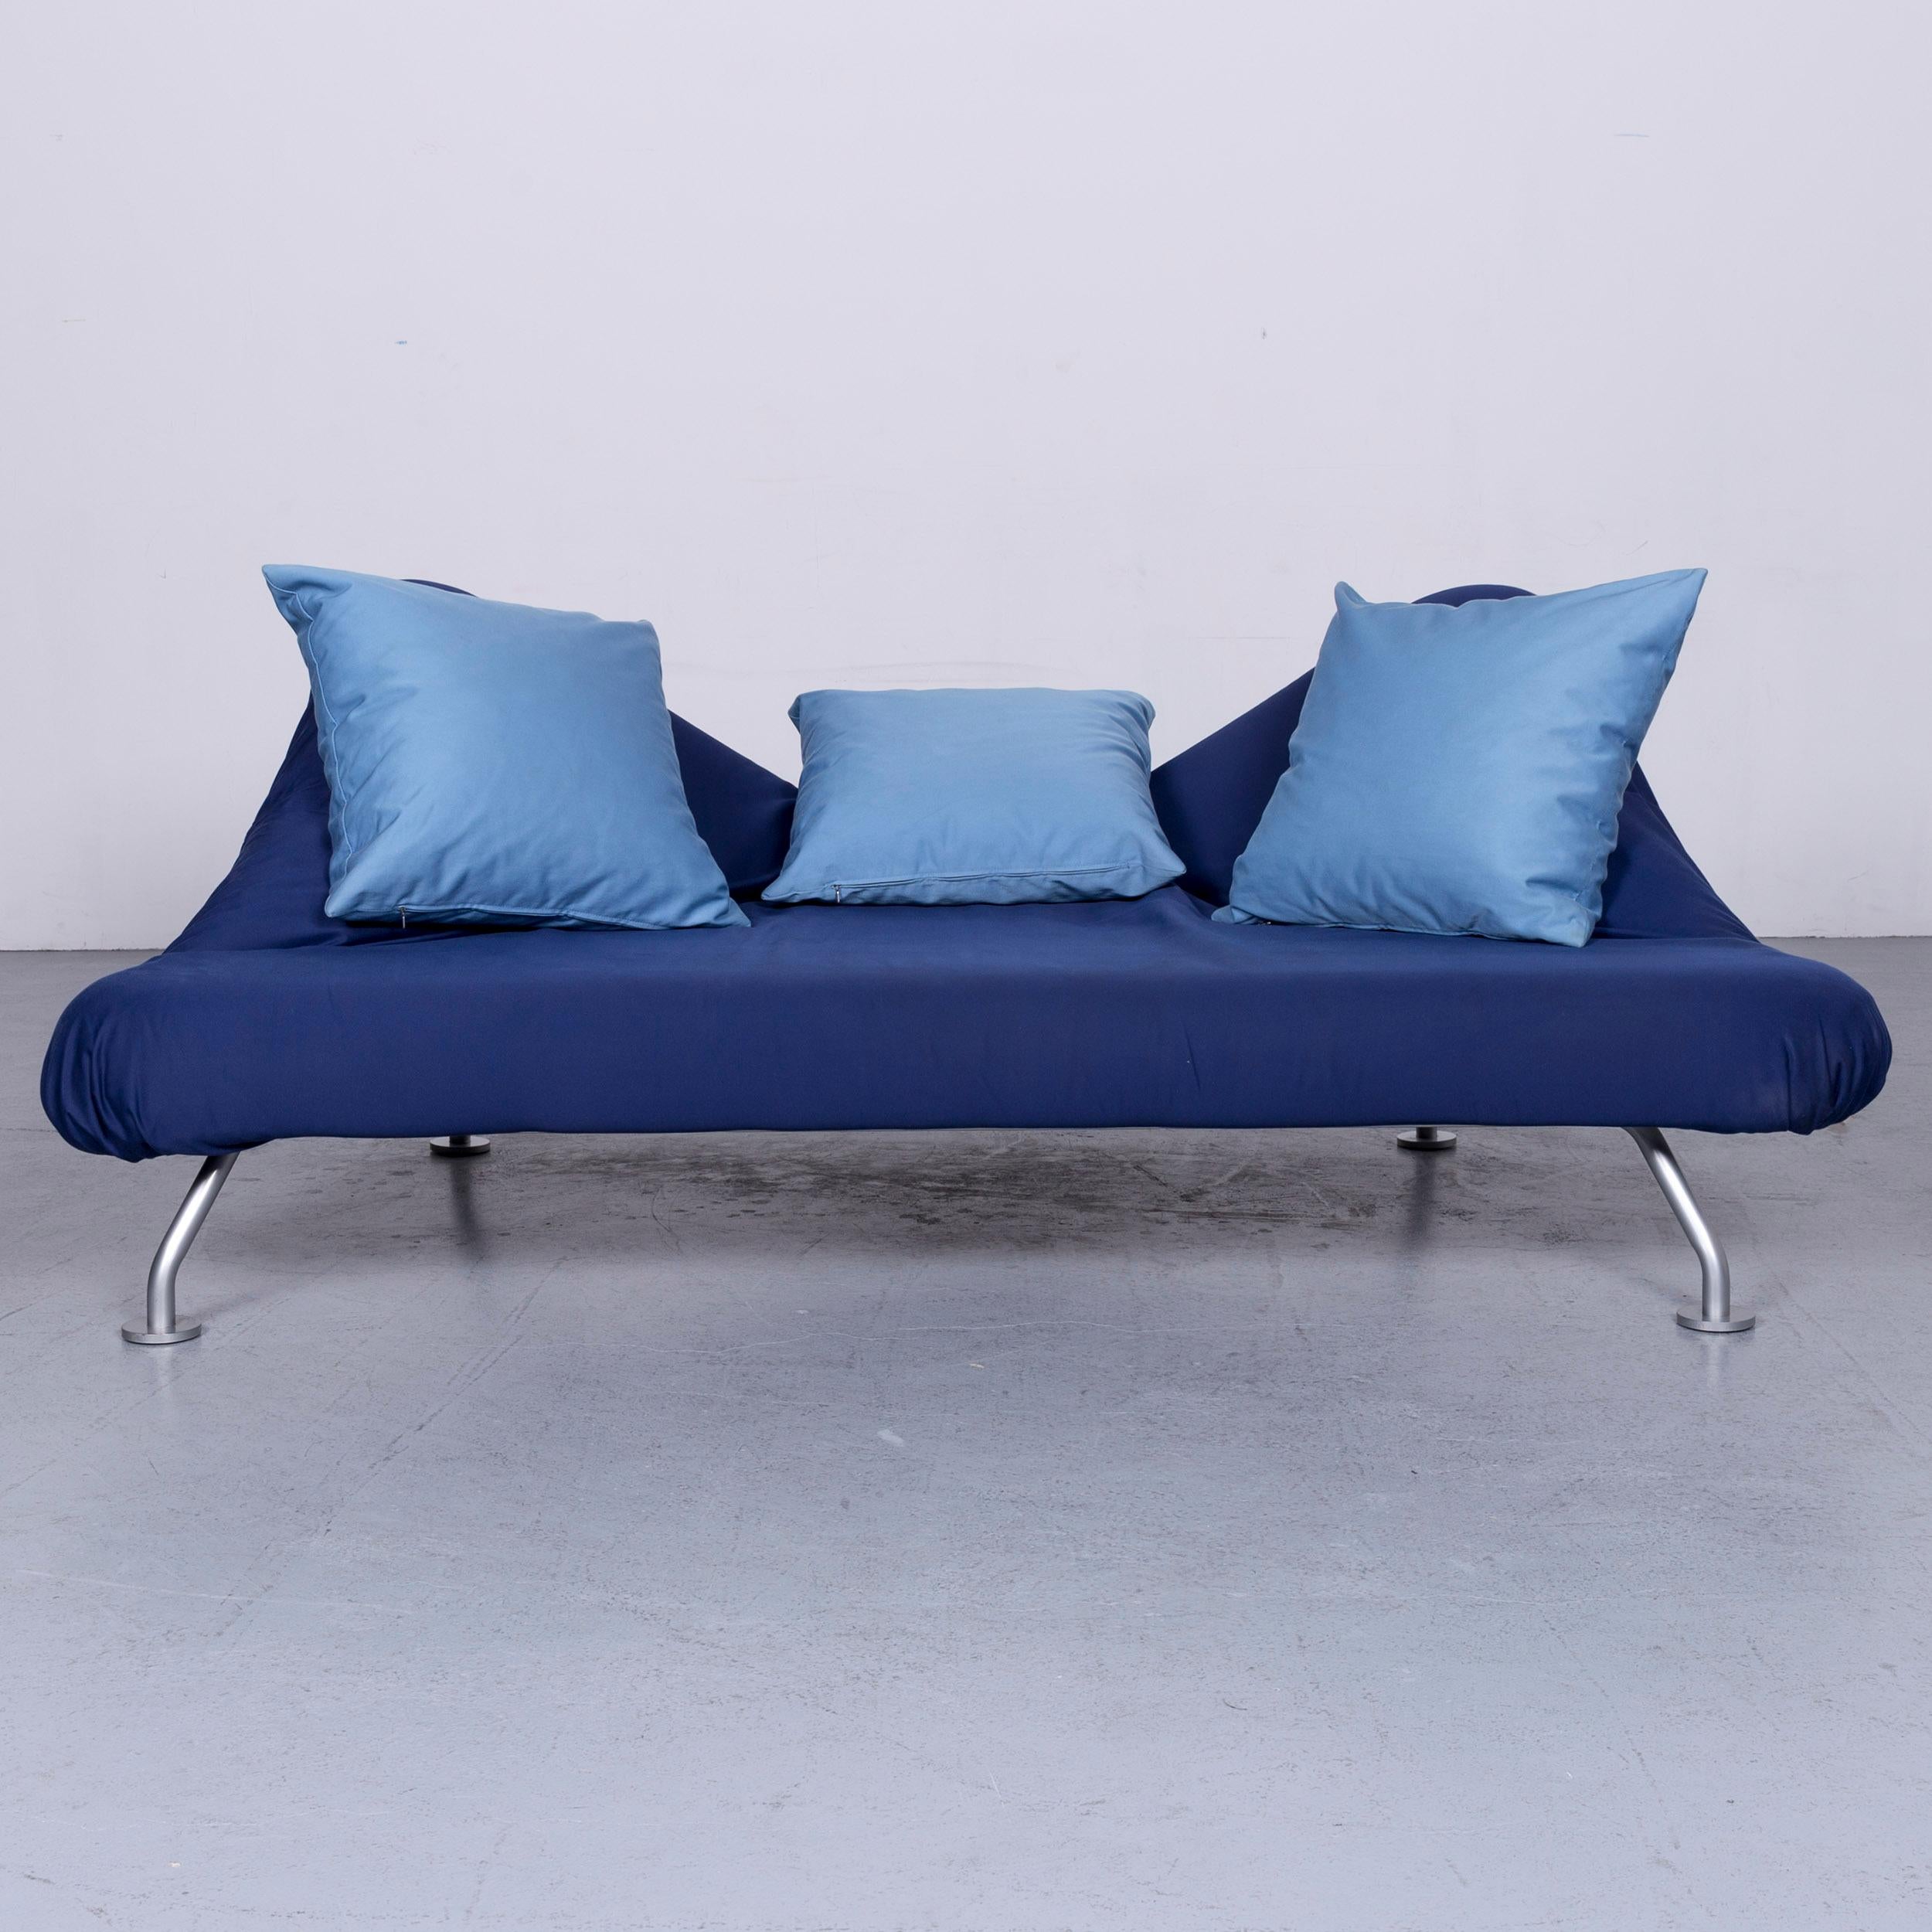 Brühl & Sippold More Designer Fabric Sofa Blue Three-Seat Couch with Function In Good Condition For Sale In Cologne, DE